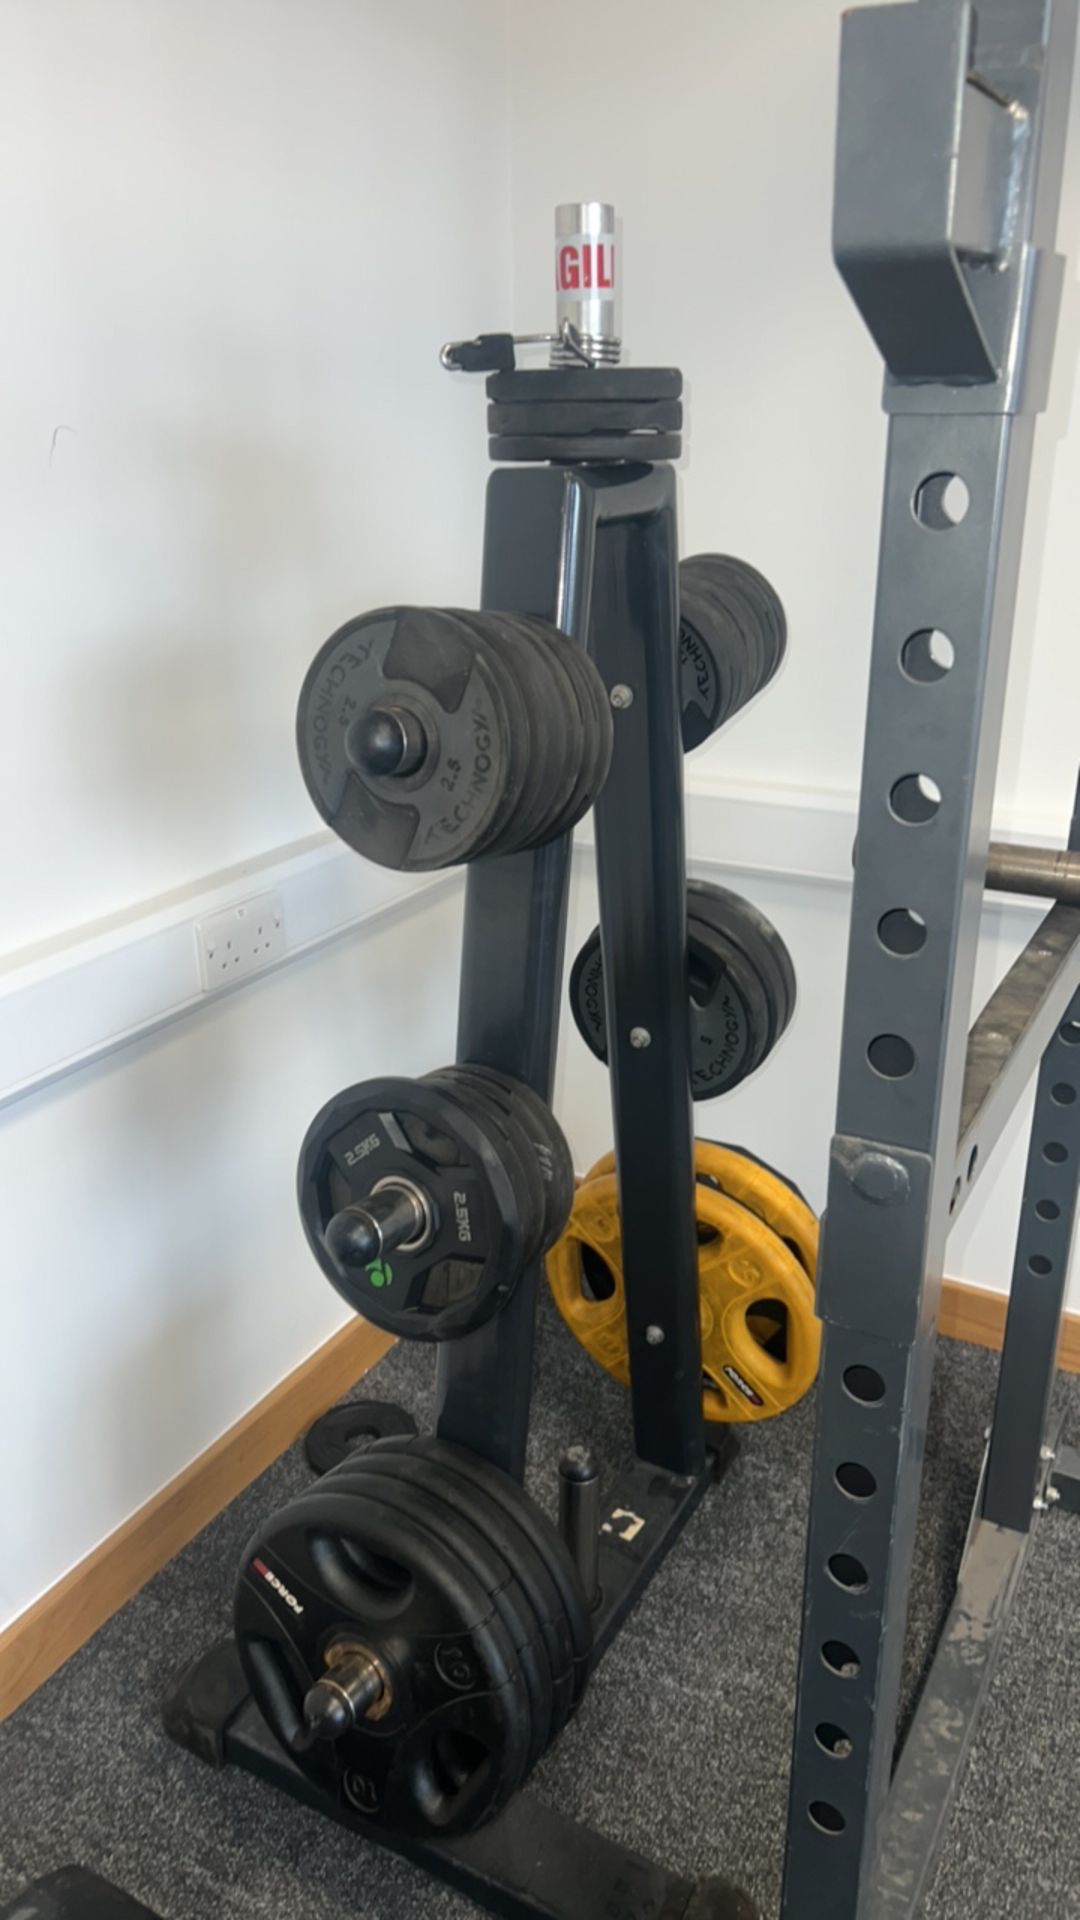 Weight Plates and Rack